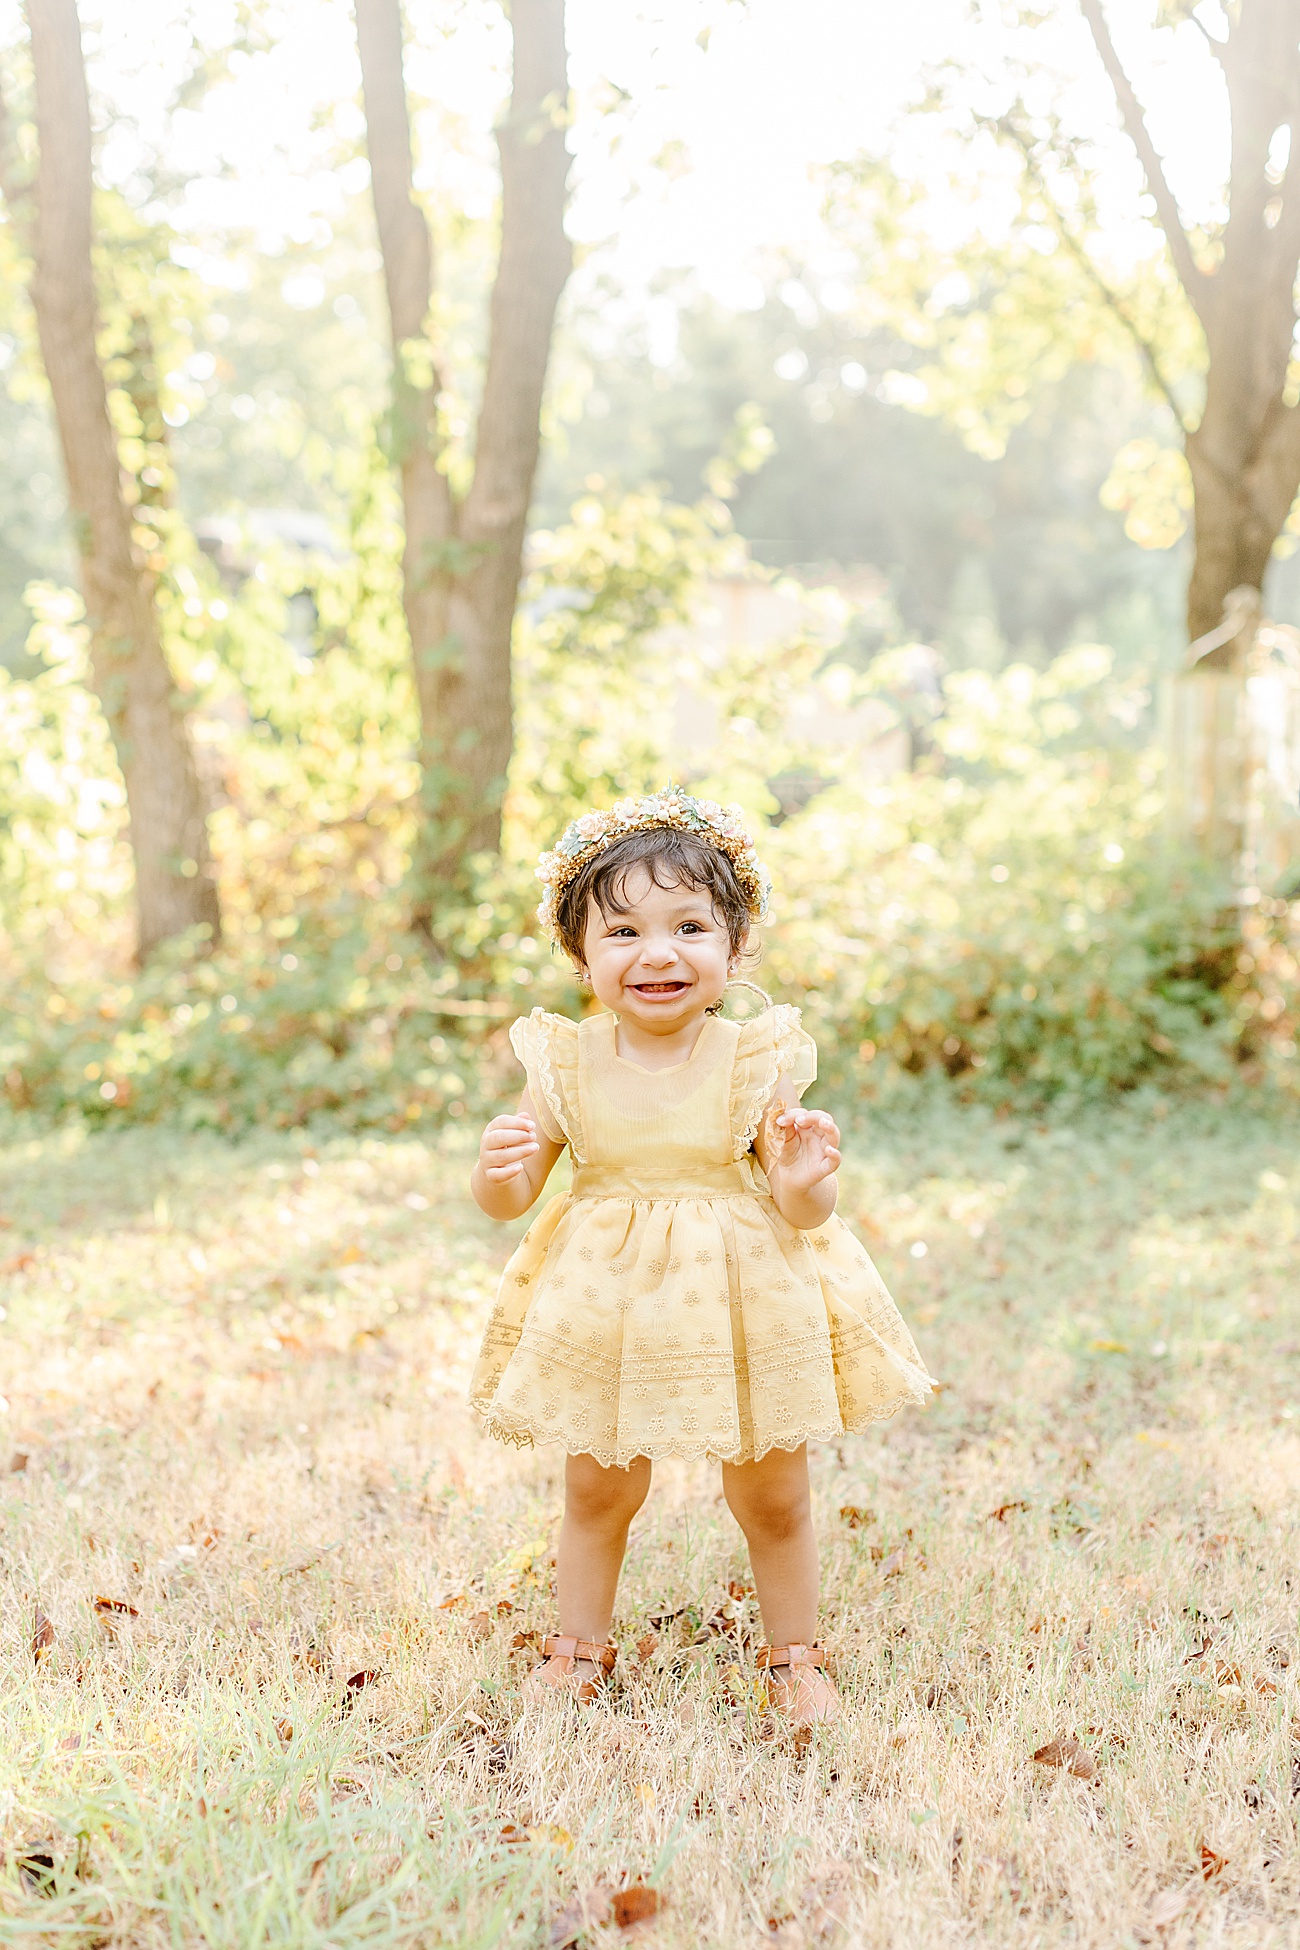 Beautiful baby girl in sunlit field. Photo by Sana Ahmed Photography